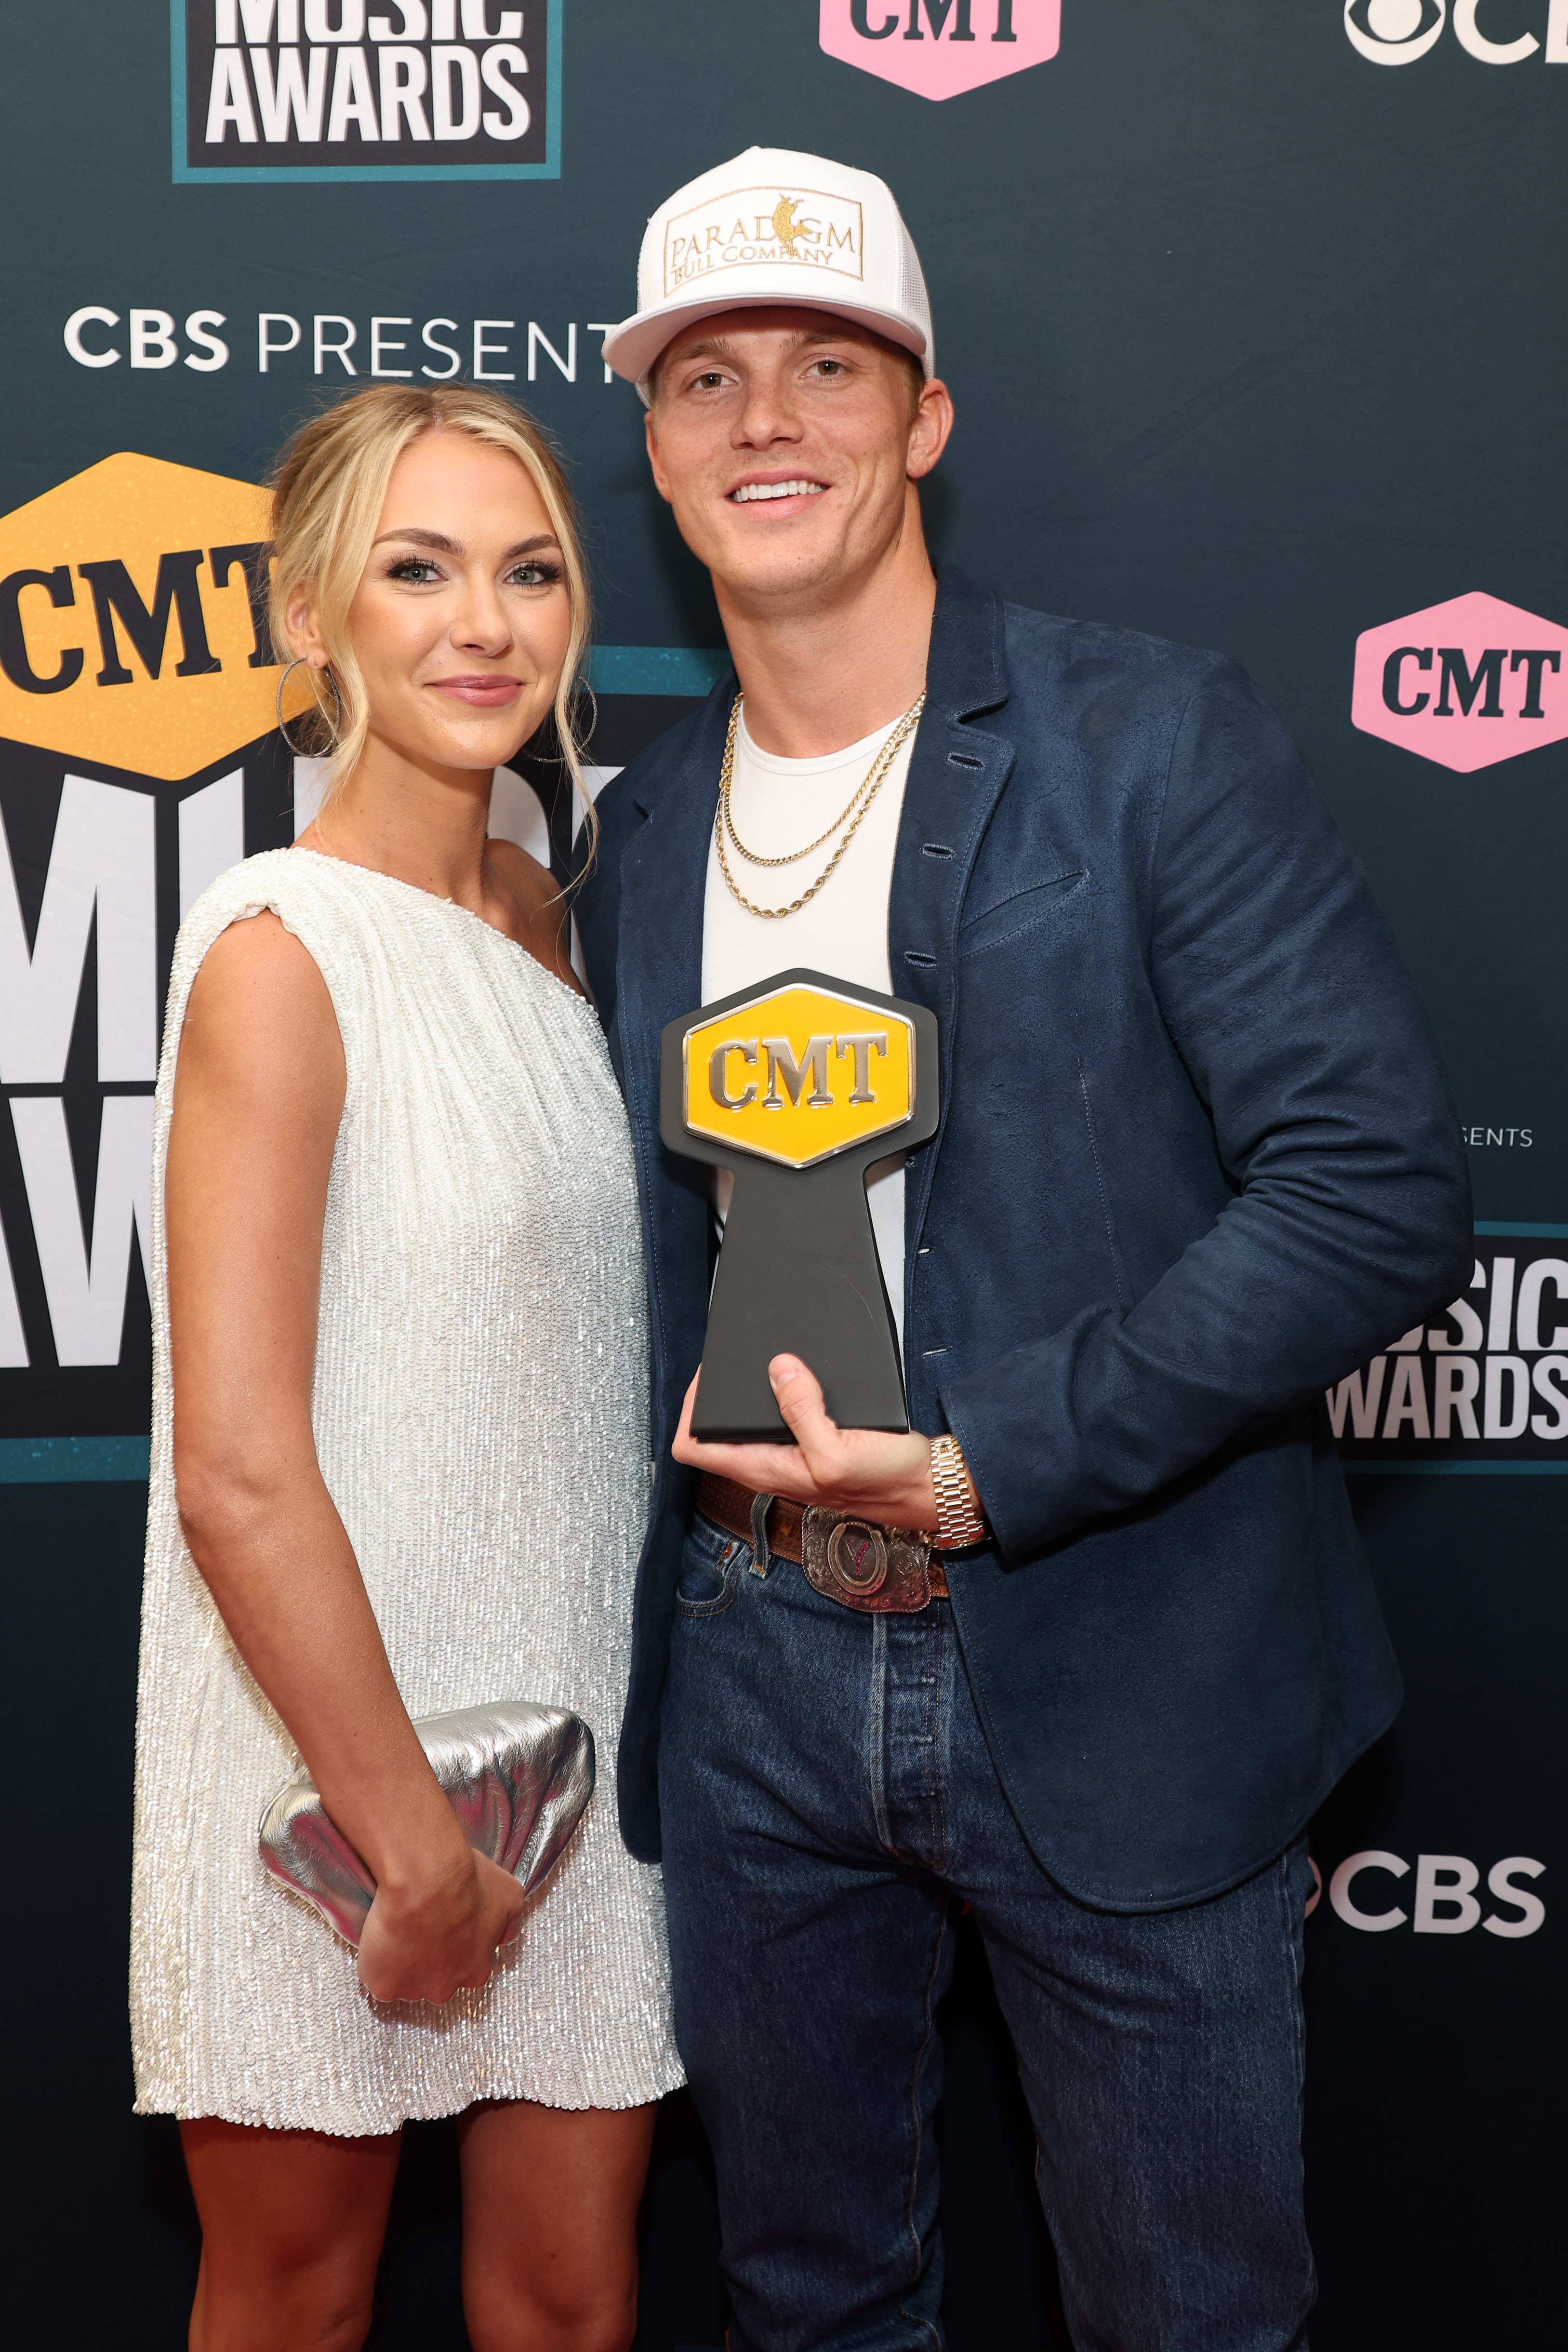 Hallie Ray Light and Parker McCollum at the 2022 CMT Music Awards on April 11, 2022, in Nashville | Source: Getty Images